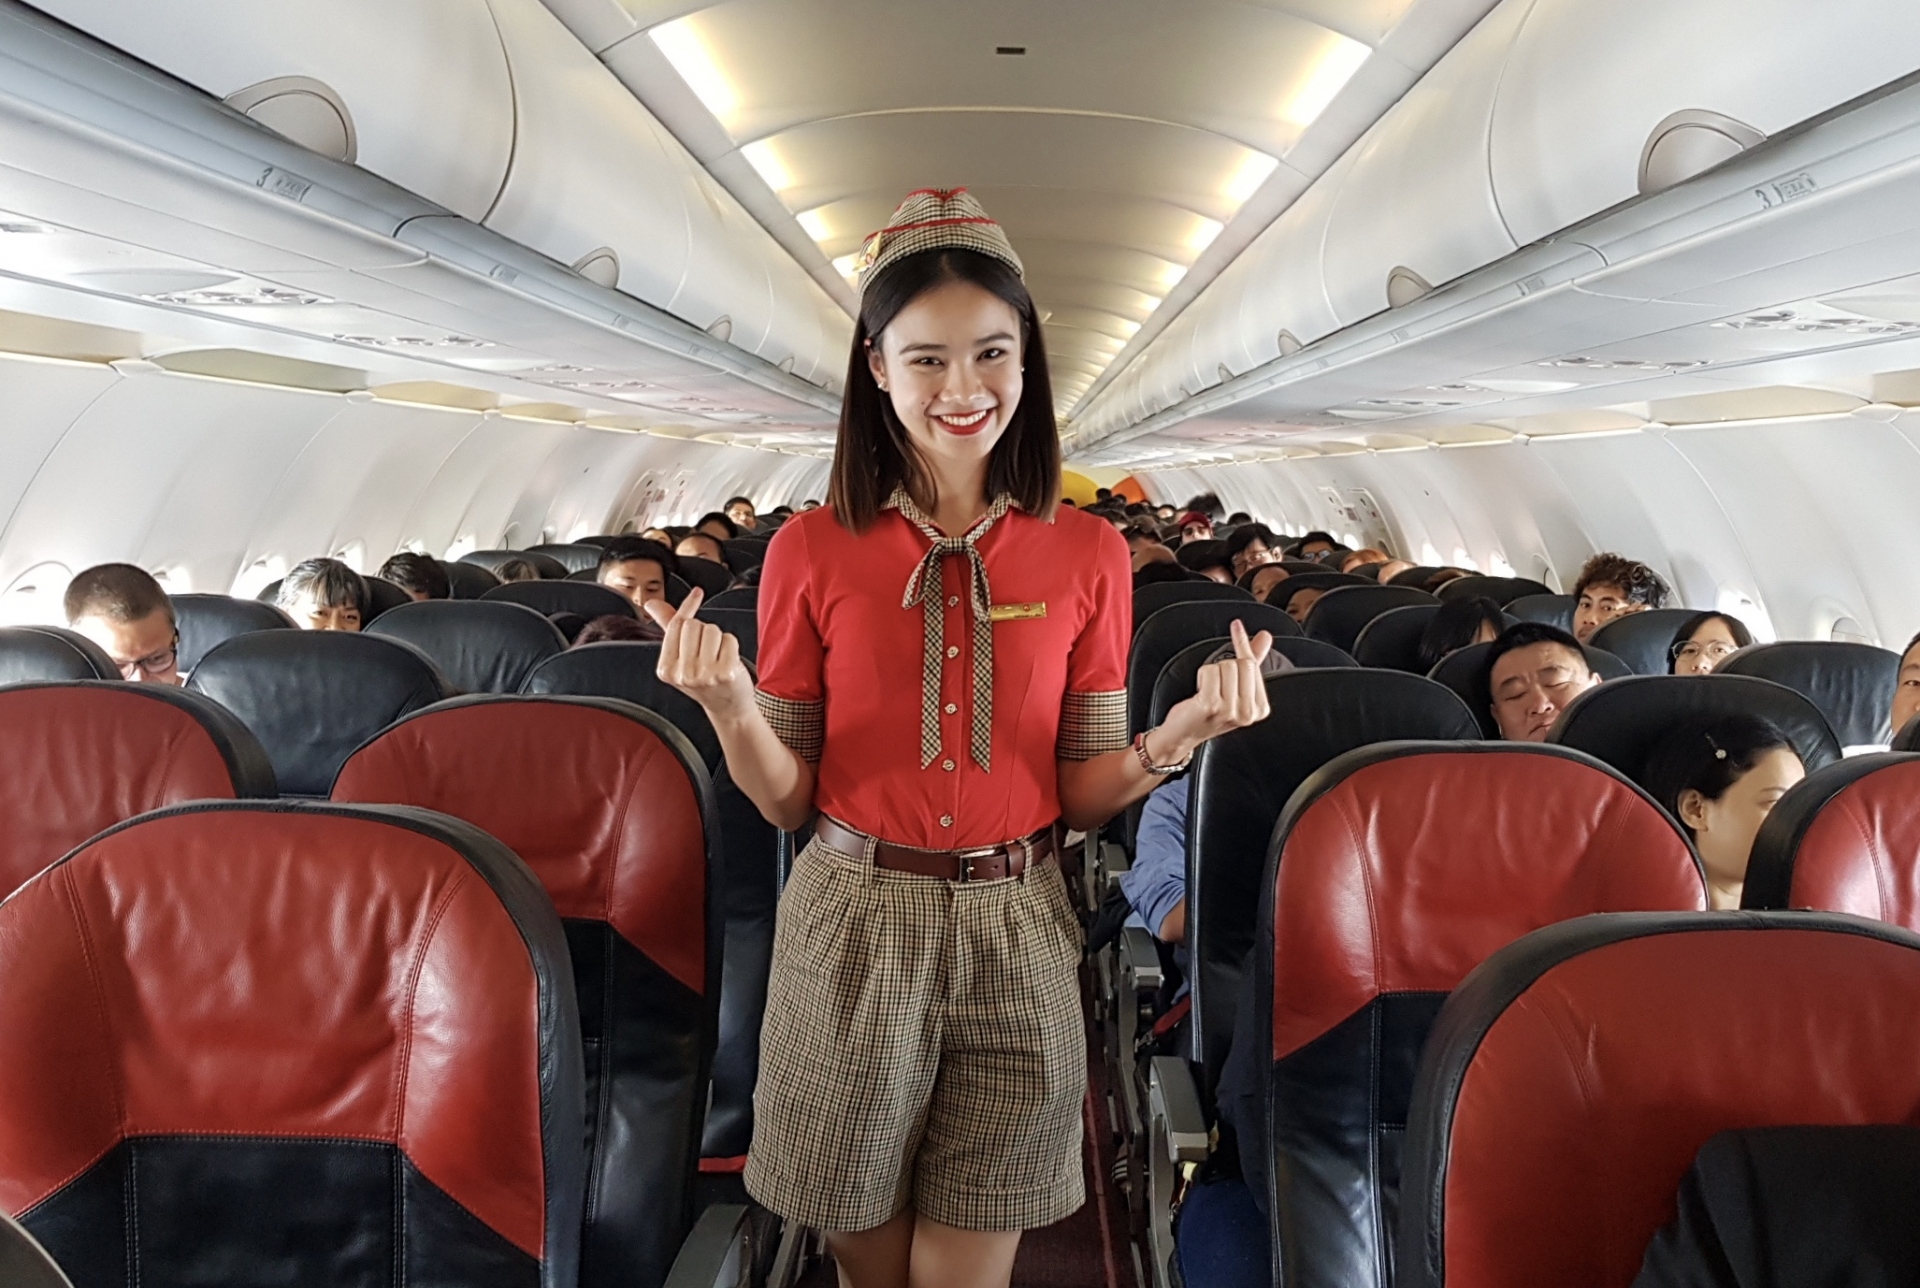 Thai Vietjet offers super-saver fares from just $1.50 for all 13 routes